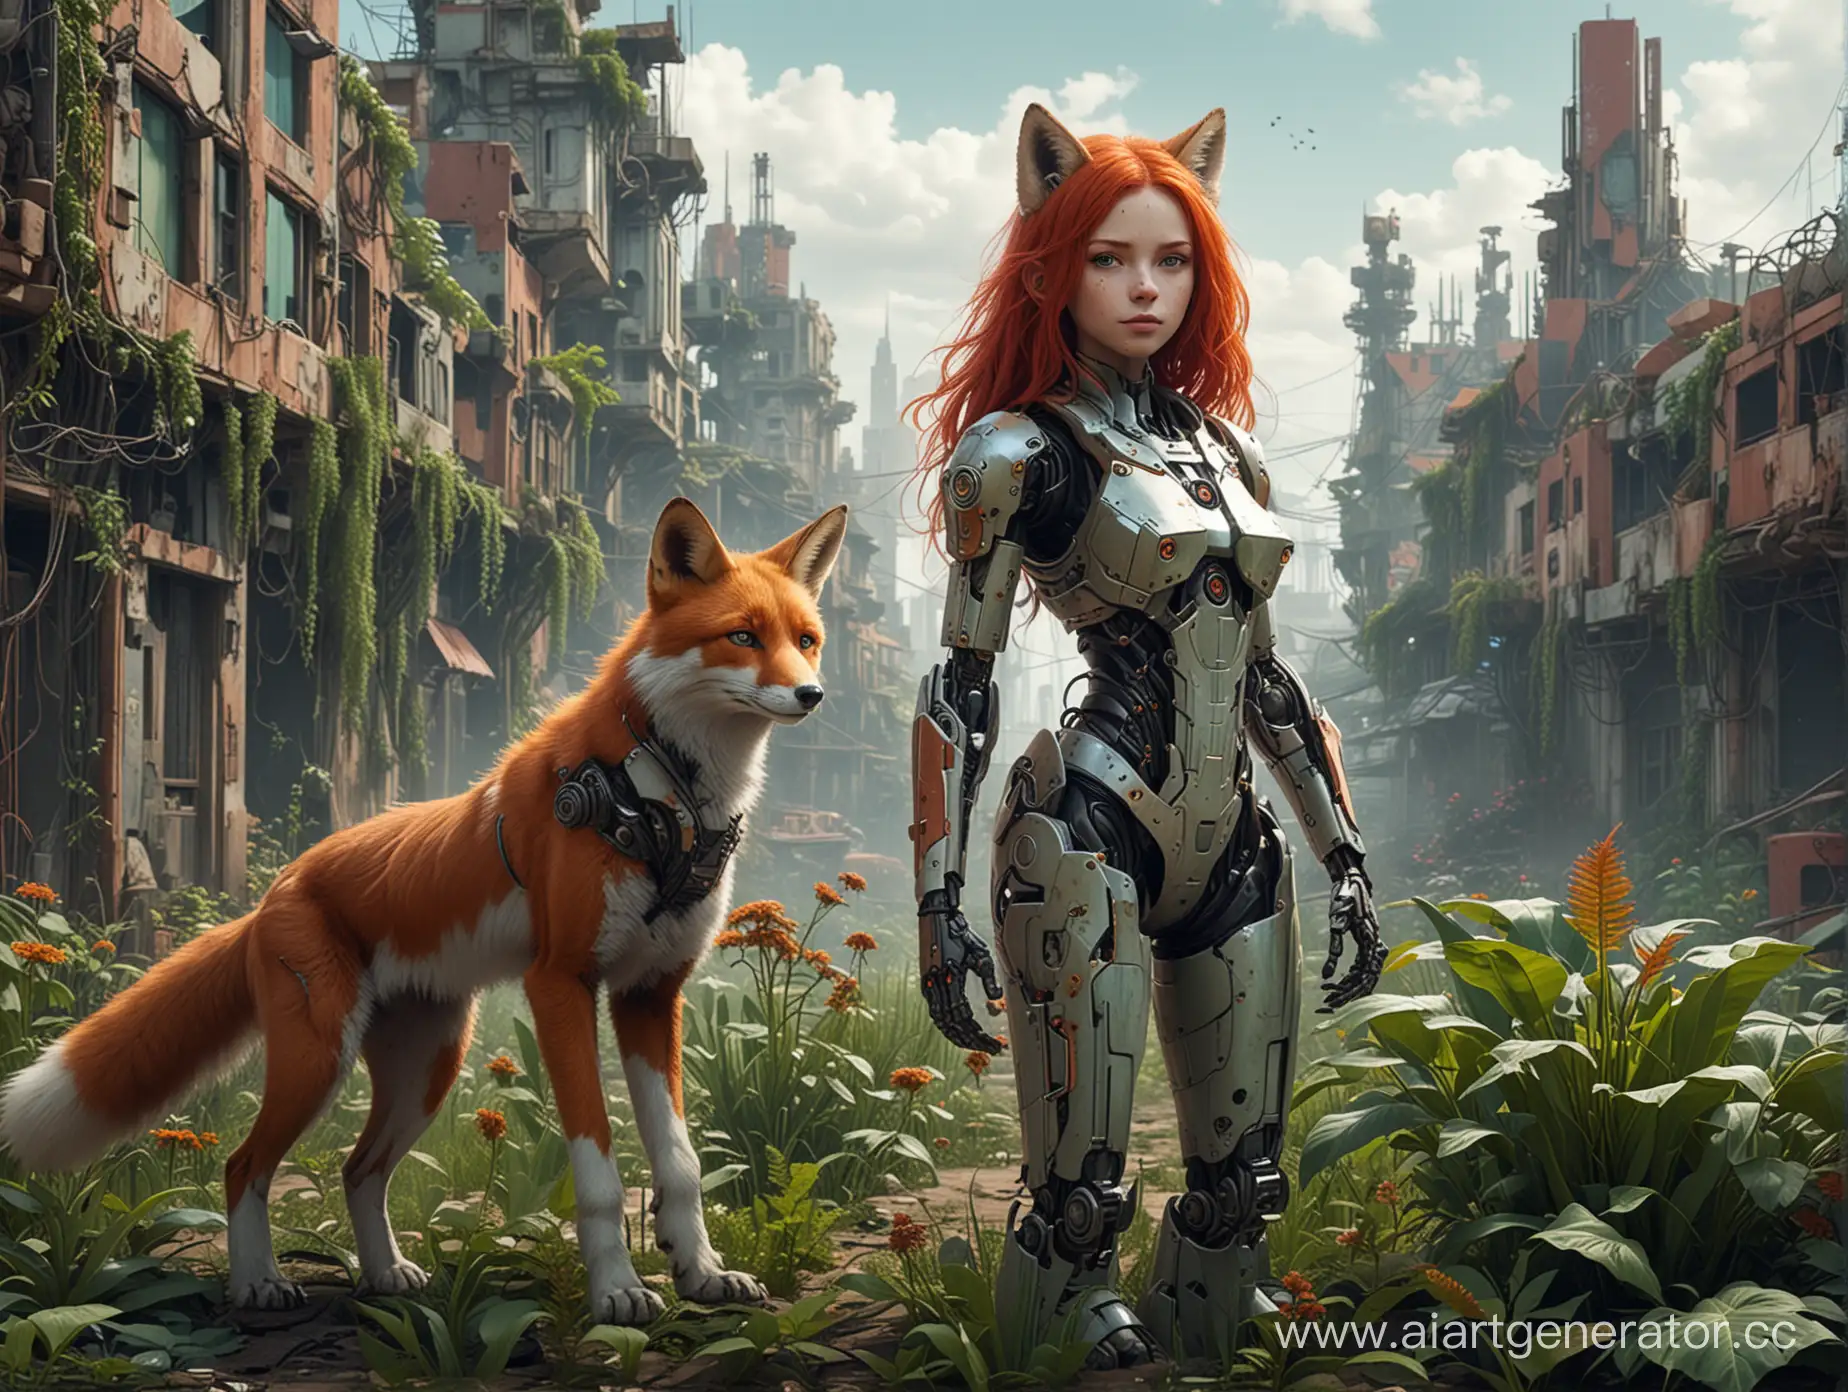 Overgrown-Cityscape-with-RedHaired-Cyborg-Girl-and-Robot-Fox-Companion